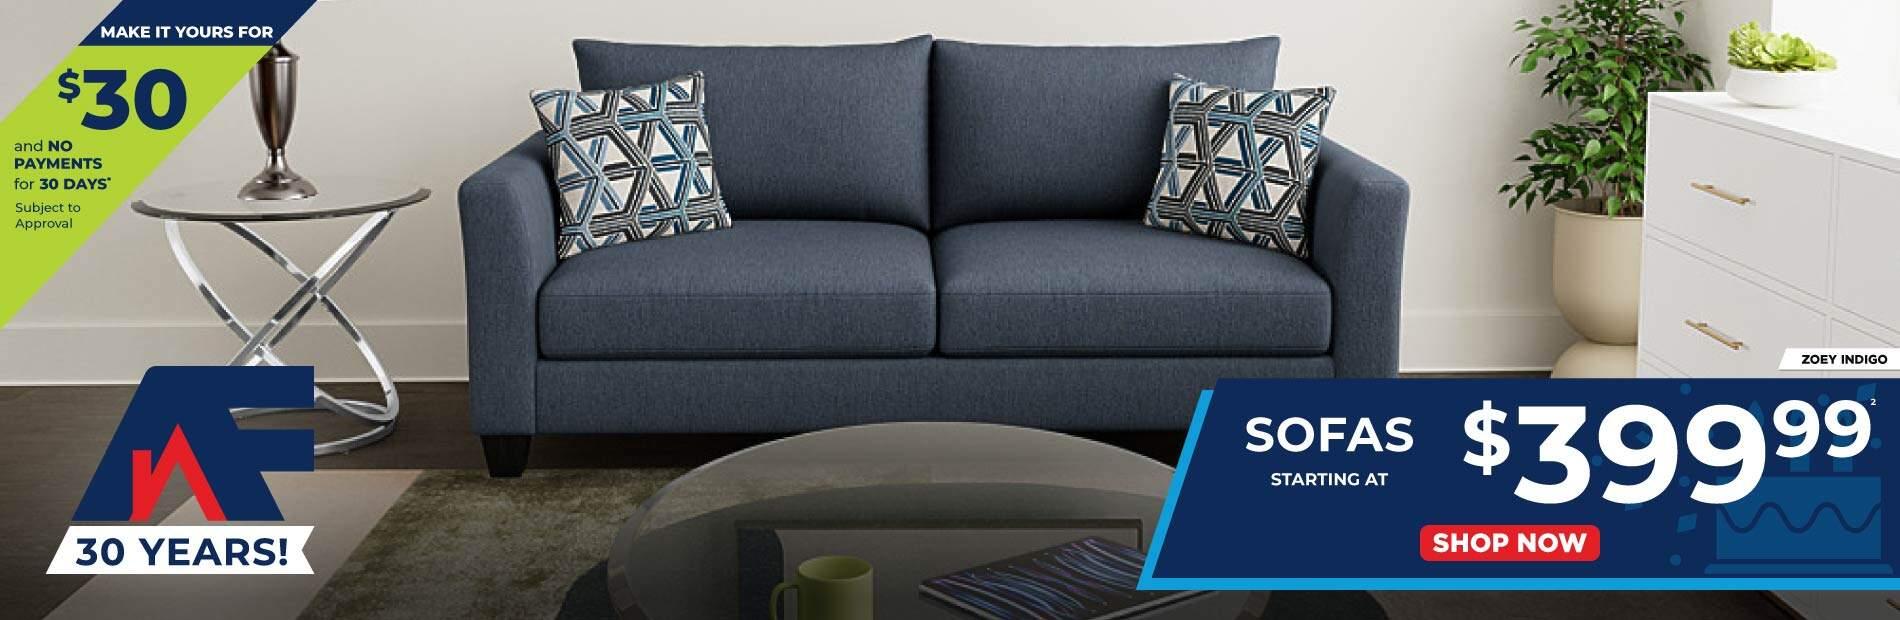 Make it yours $30 and no payments for 30 days subject to approval. 30 Years! Zoey Indigo.Sofas starting at $399.99. 2. Shop Now. 